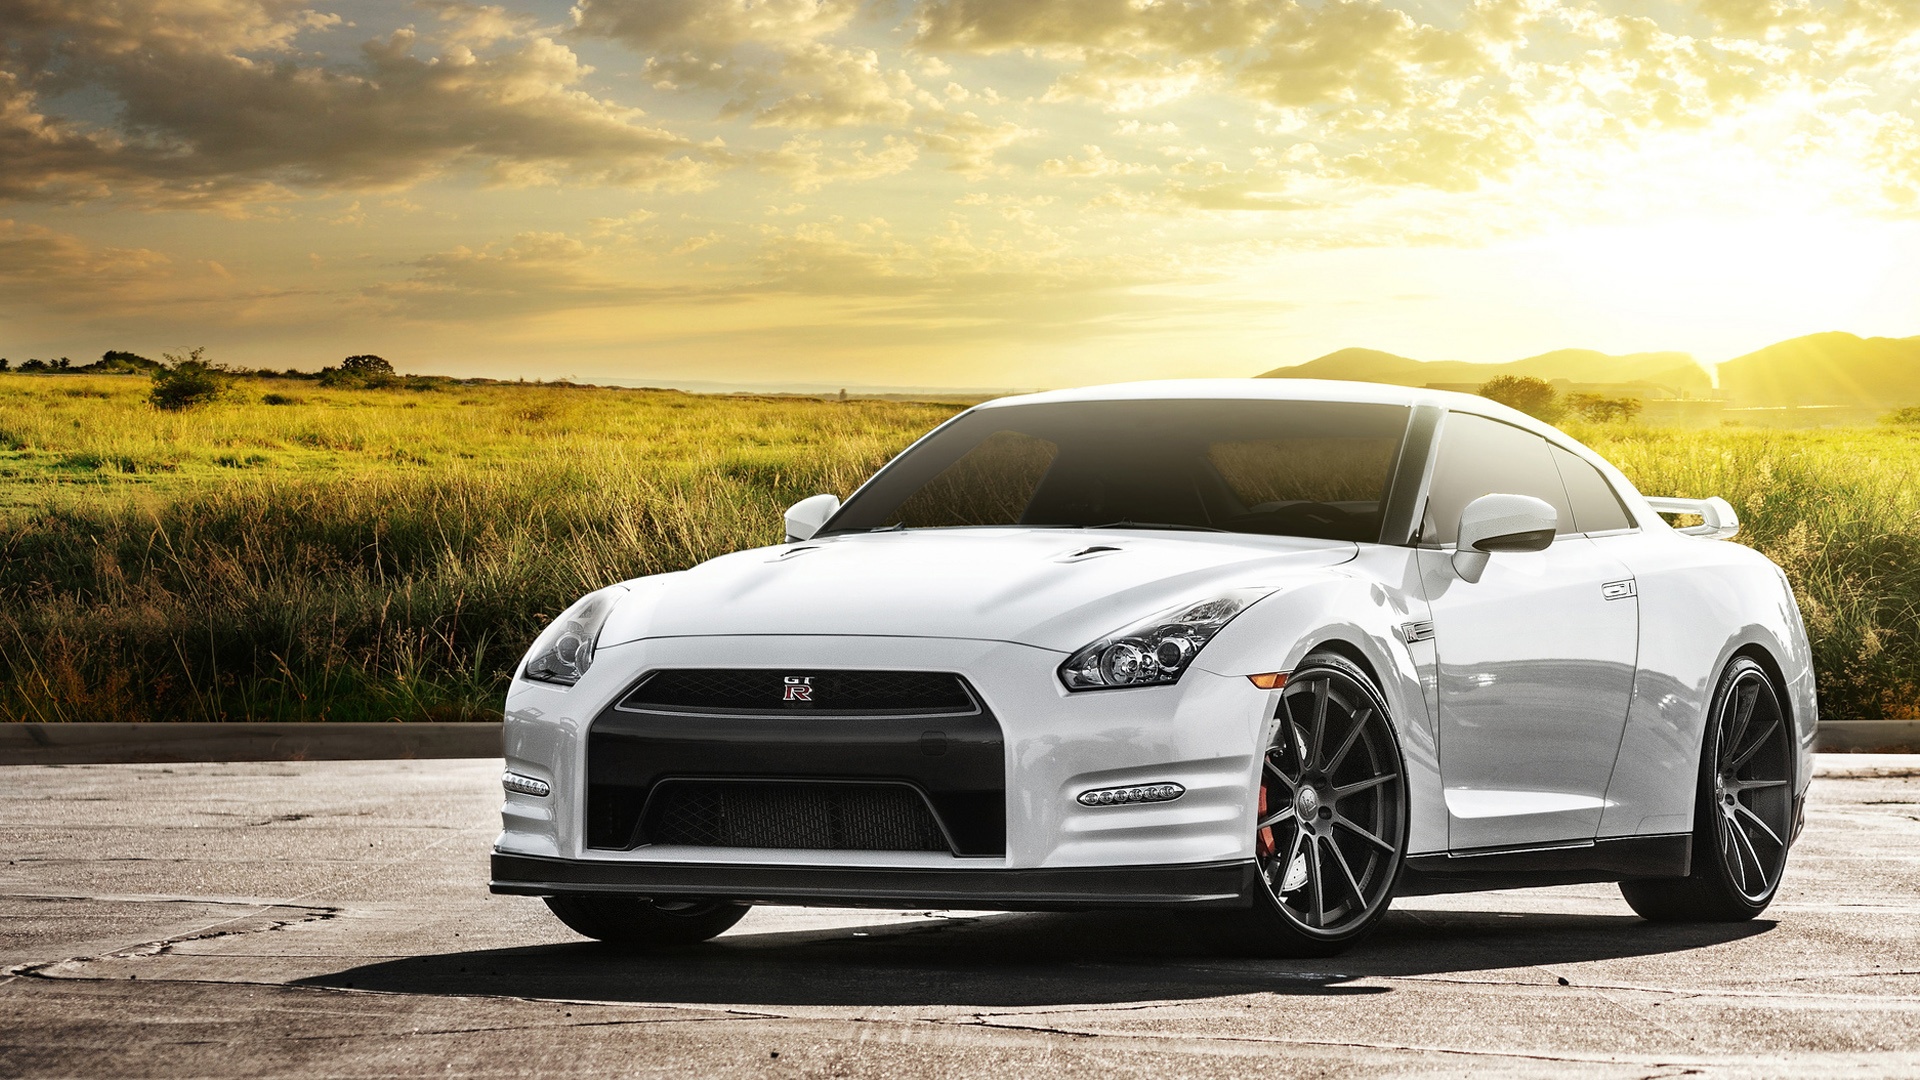 Nissan Gt R Wallpapers Humphrey 13 壁紙 ファンポップ Page 14